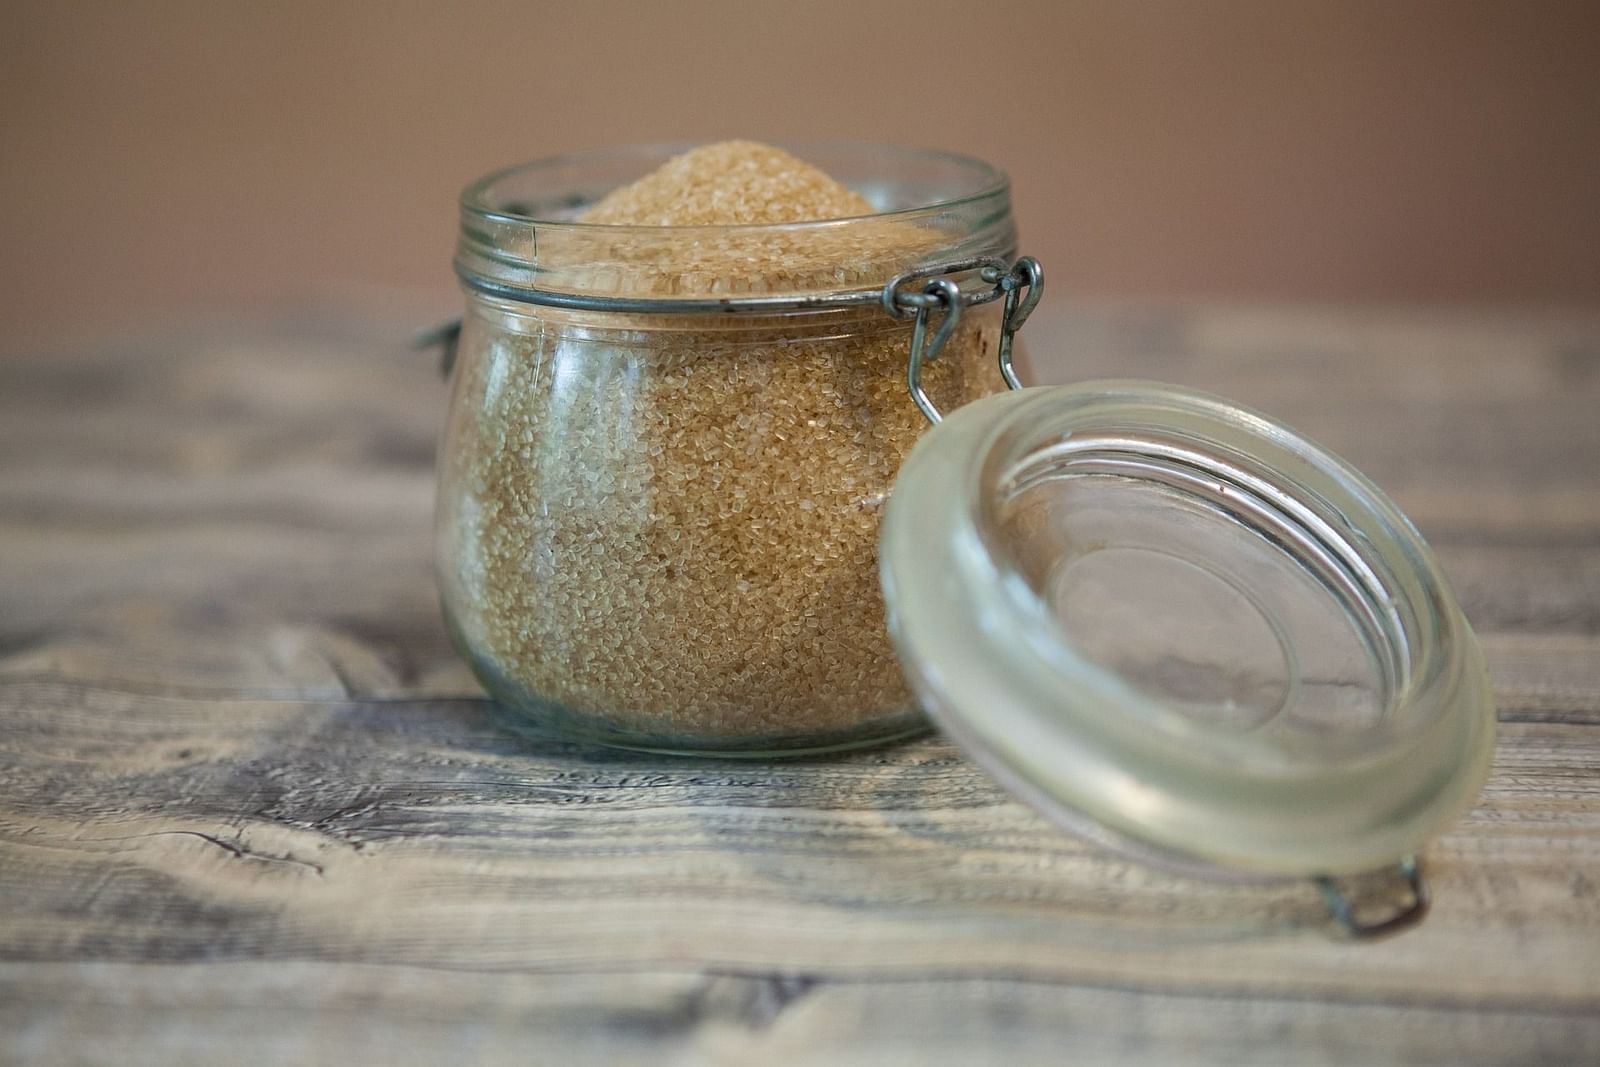 Debunking Myths About Brown Sugar: Separating Fact from Fiction